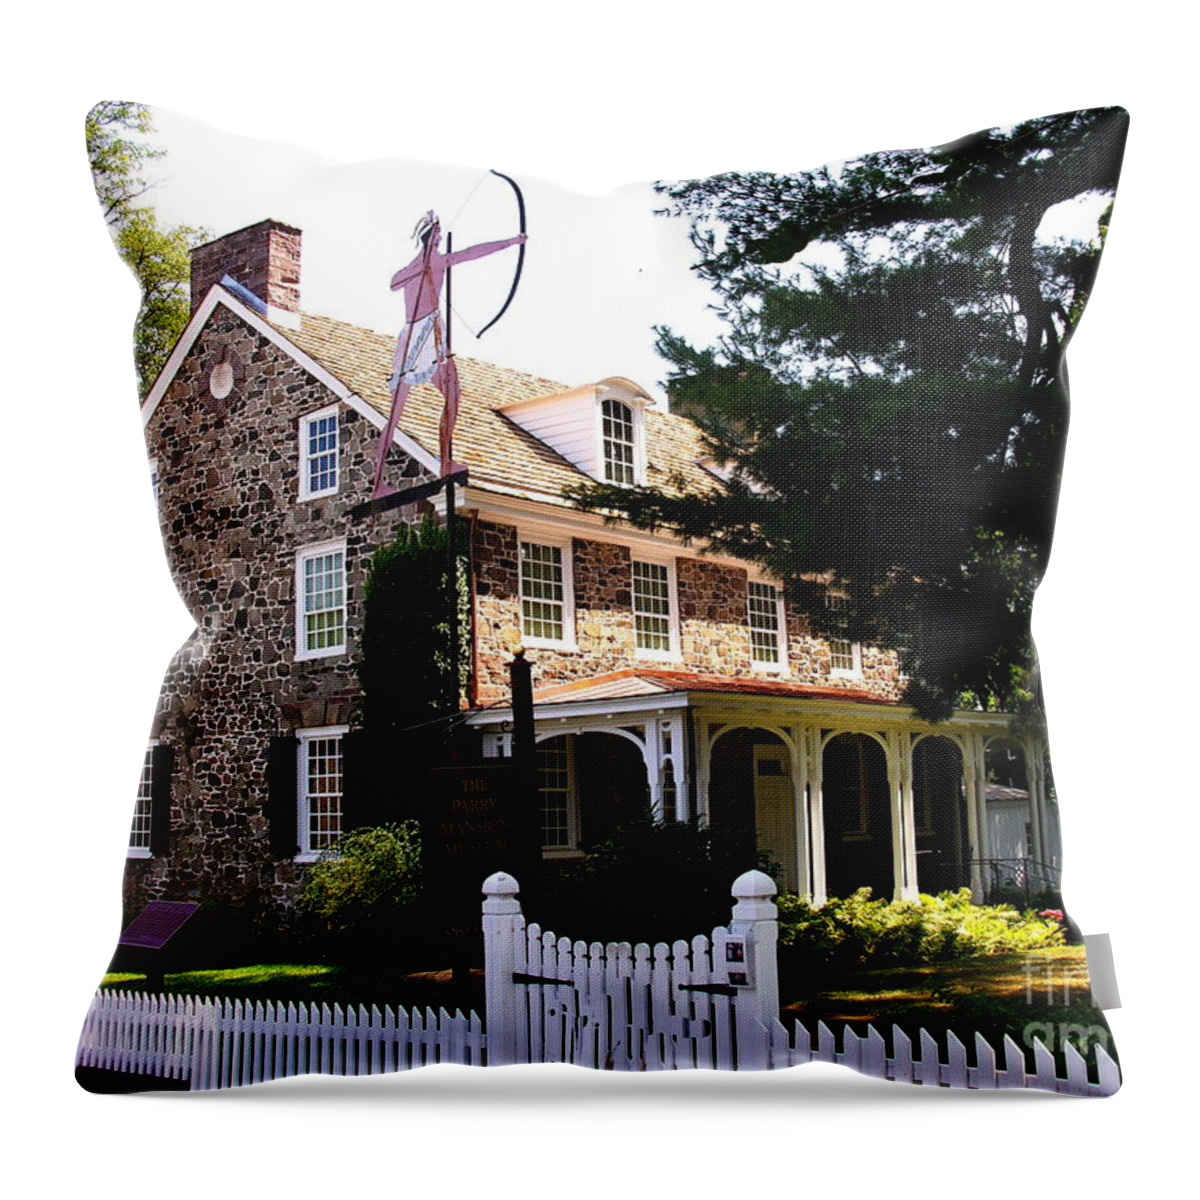 New Hope Pa Throw Pillow featuring the photograph Parry Mansion Museum by Jacqueline M Lewis